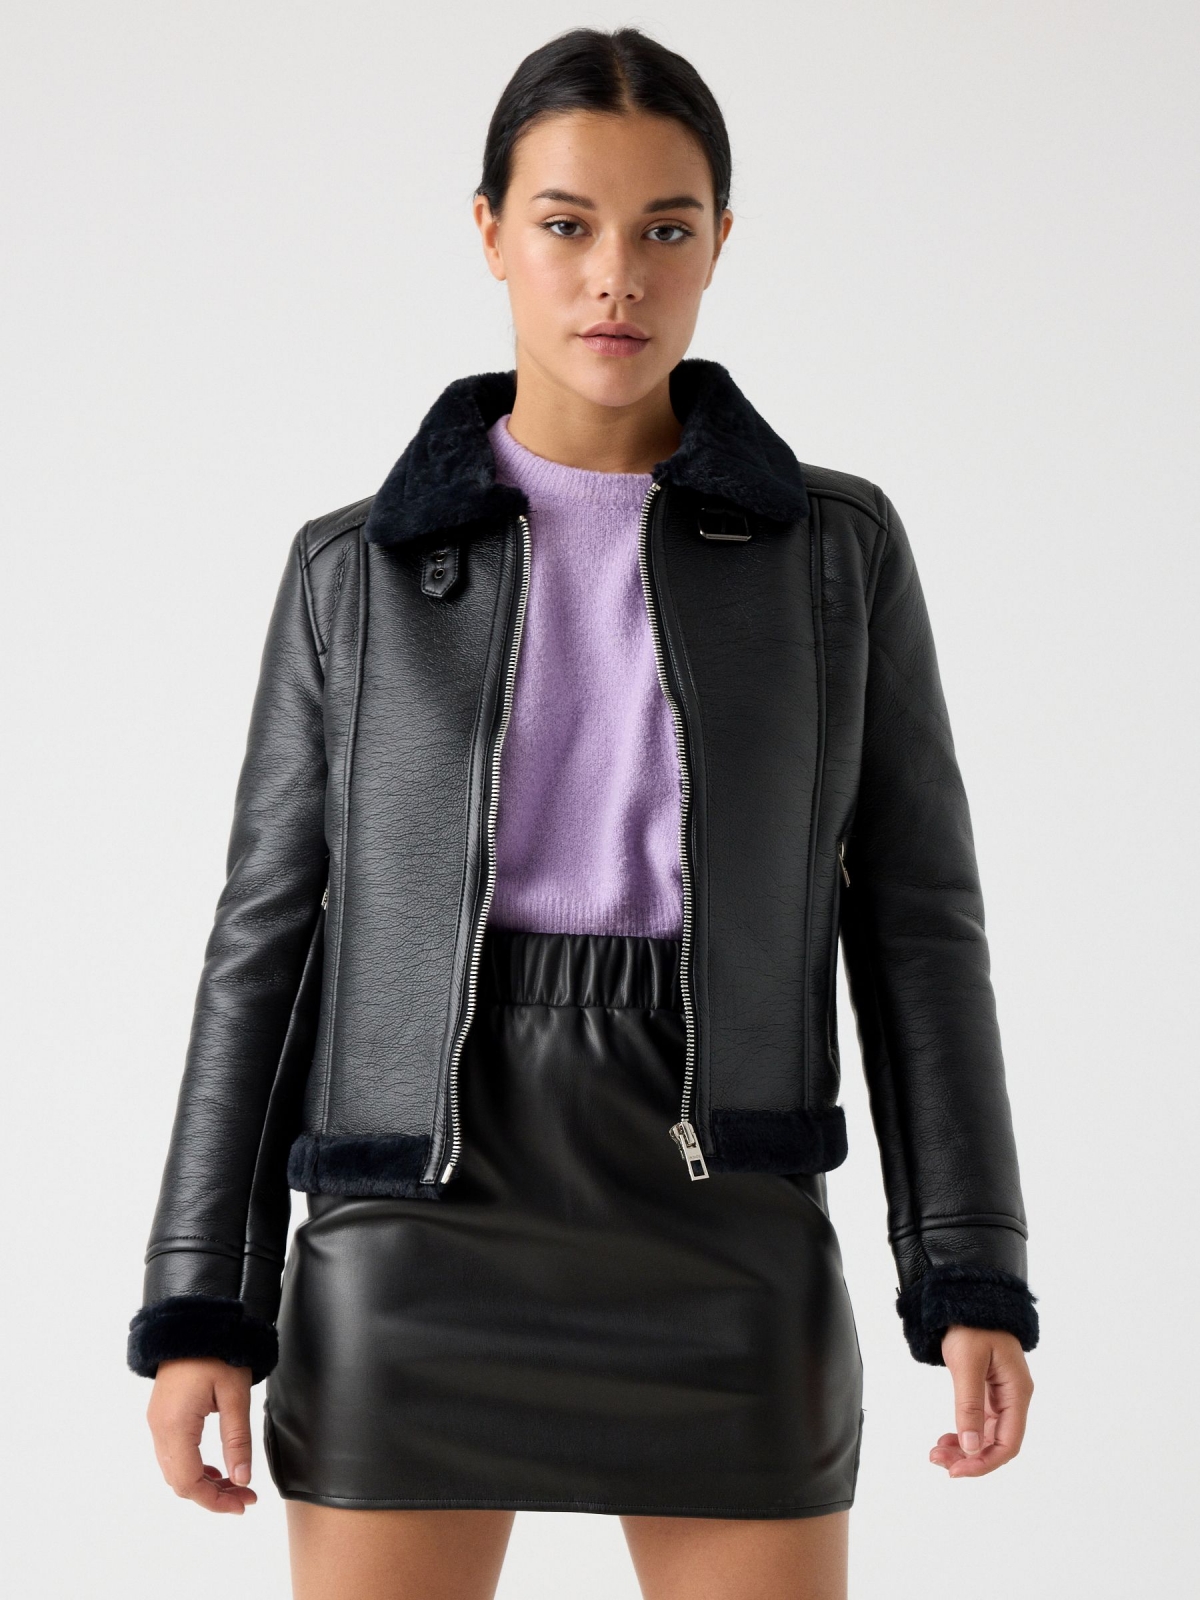 Leatherette jacket with fur black middle front view